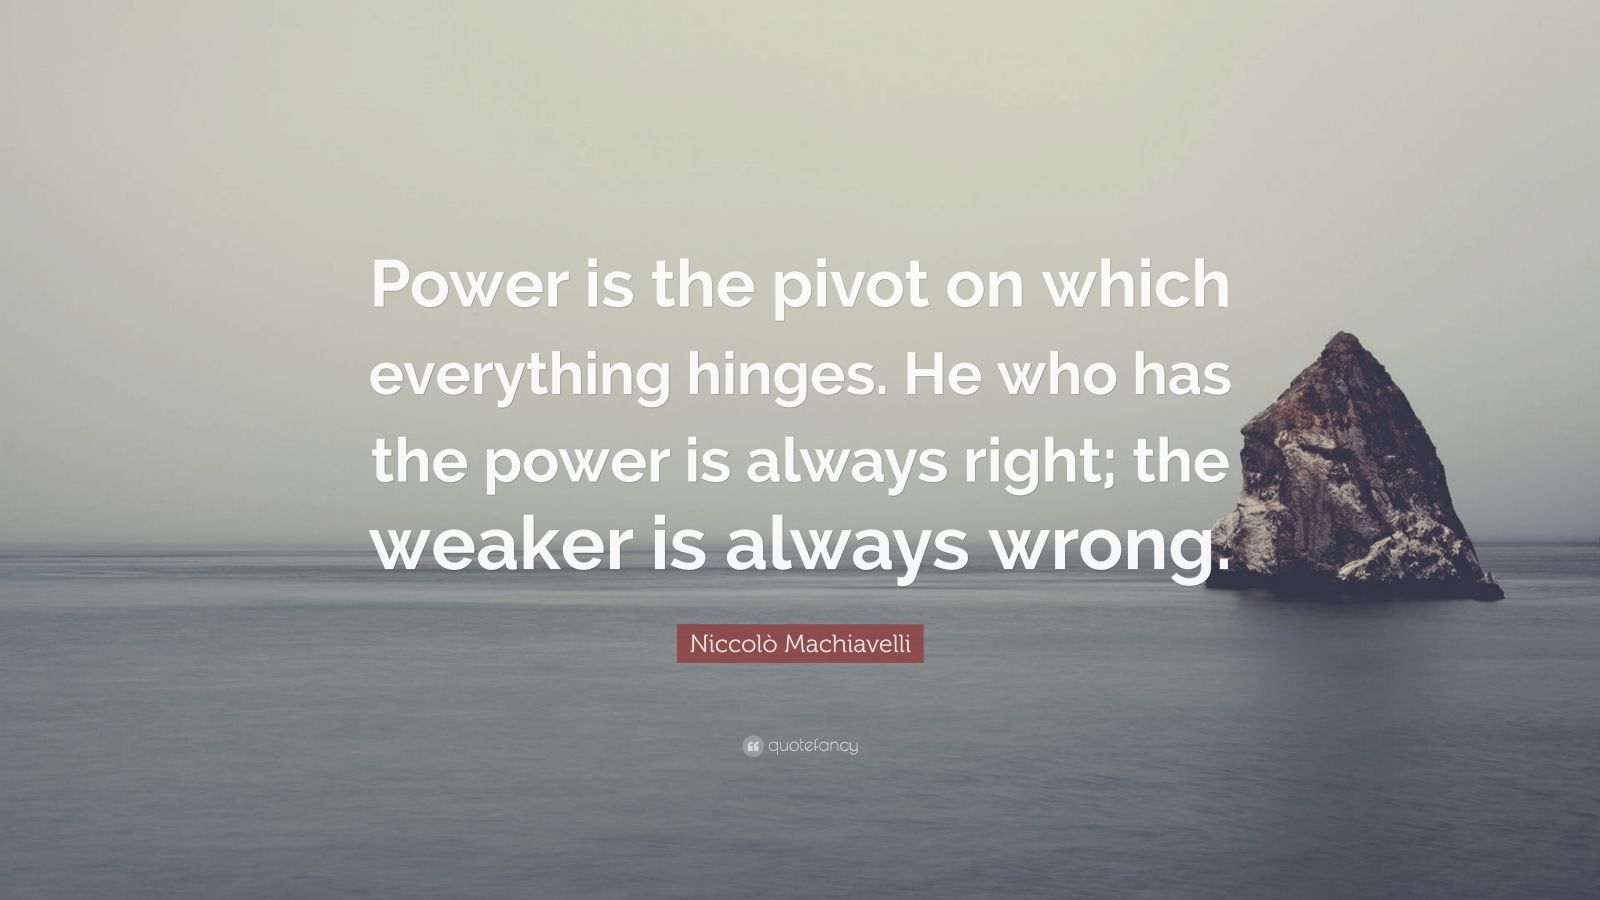 Niccolò Machiavelli Quote: “Power is the pivot on which everything